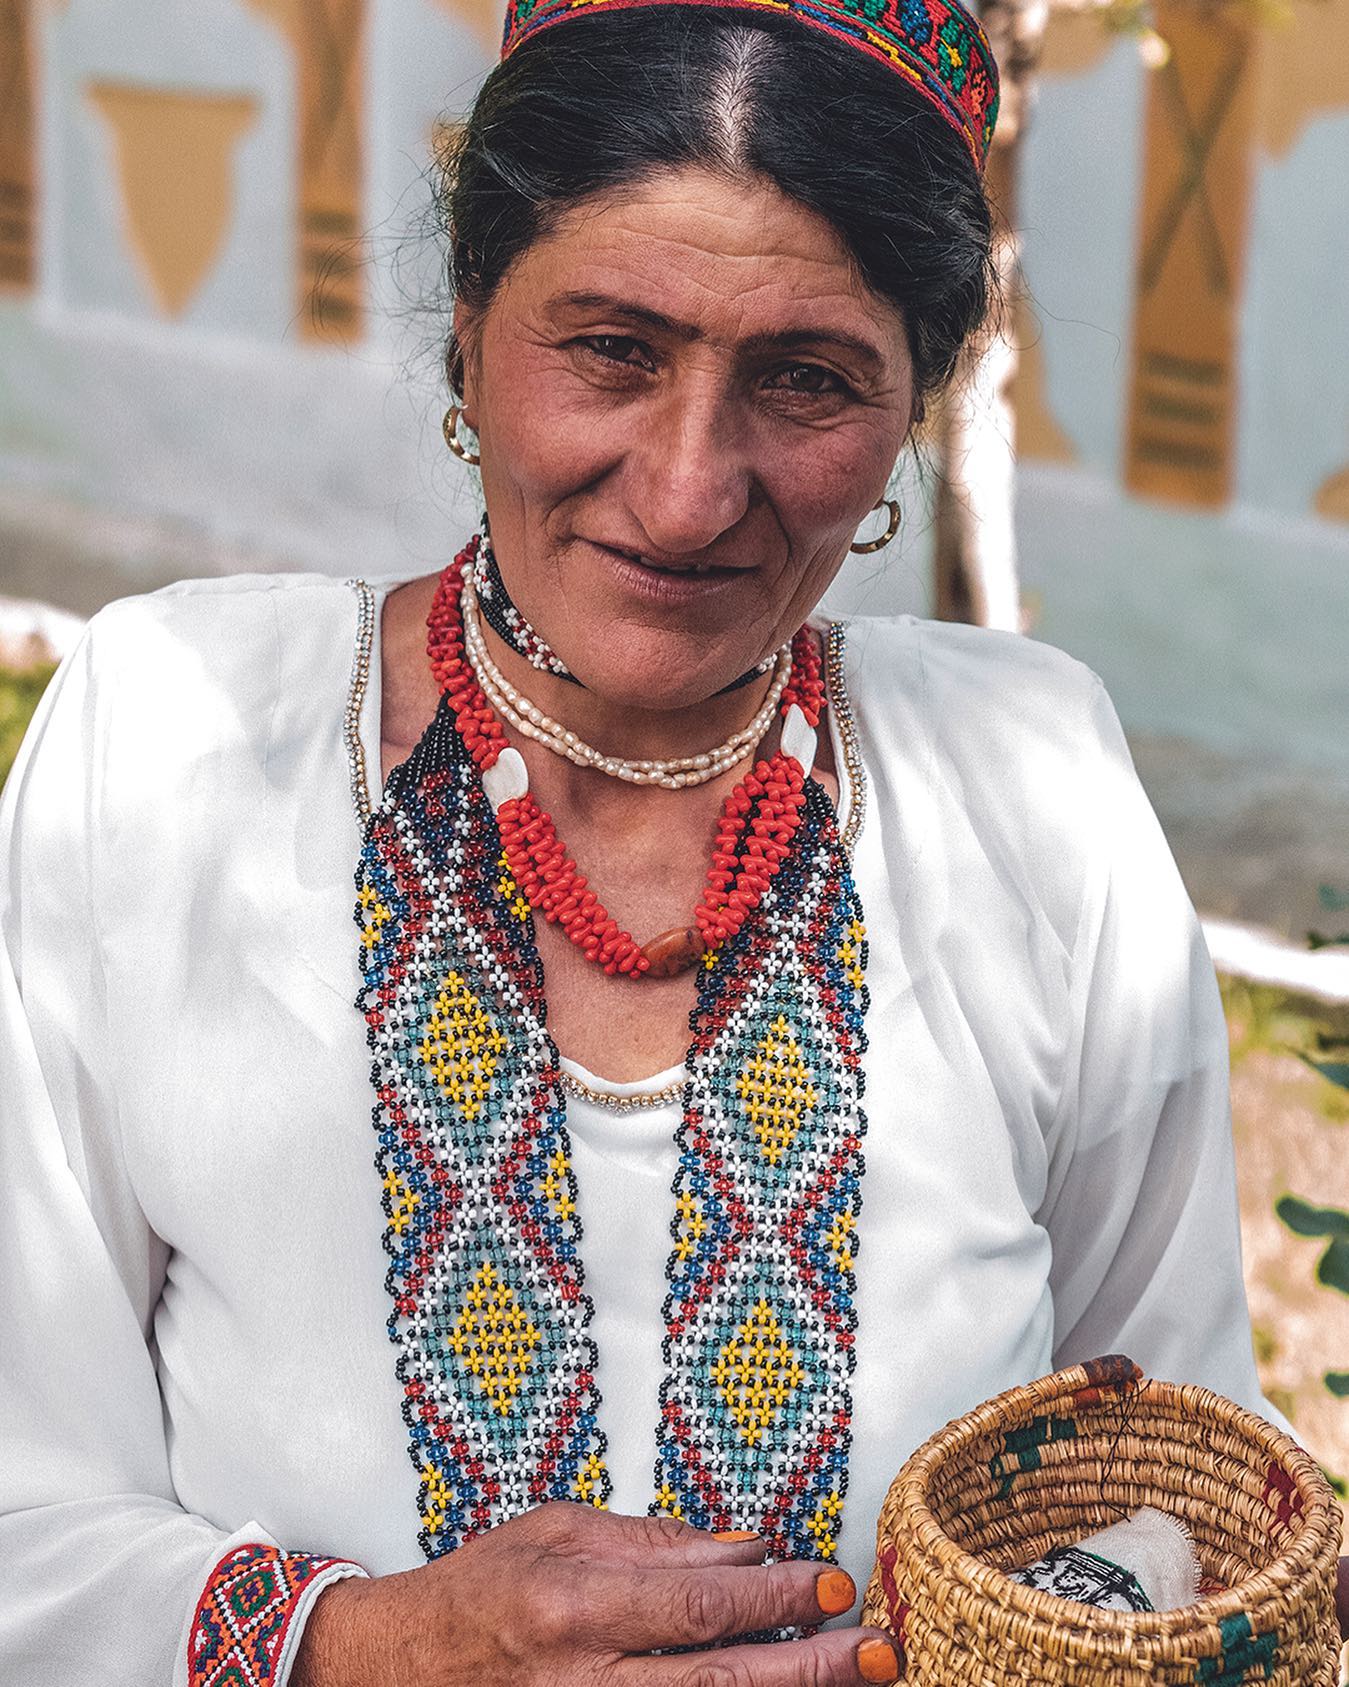 A Wakhi woman in Langar, Tajikistan dressed in traditional clothing for a local festival.